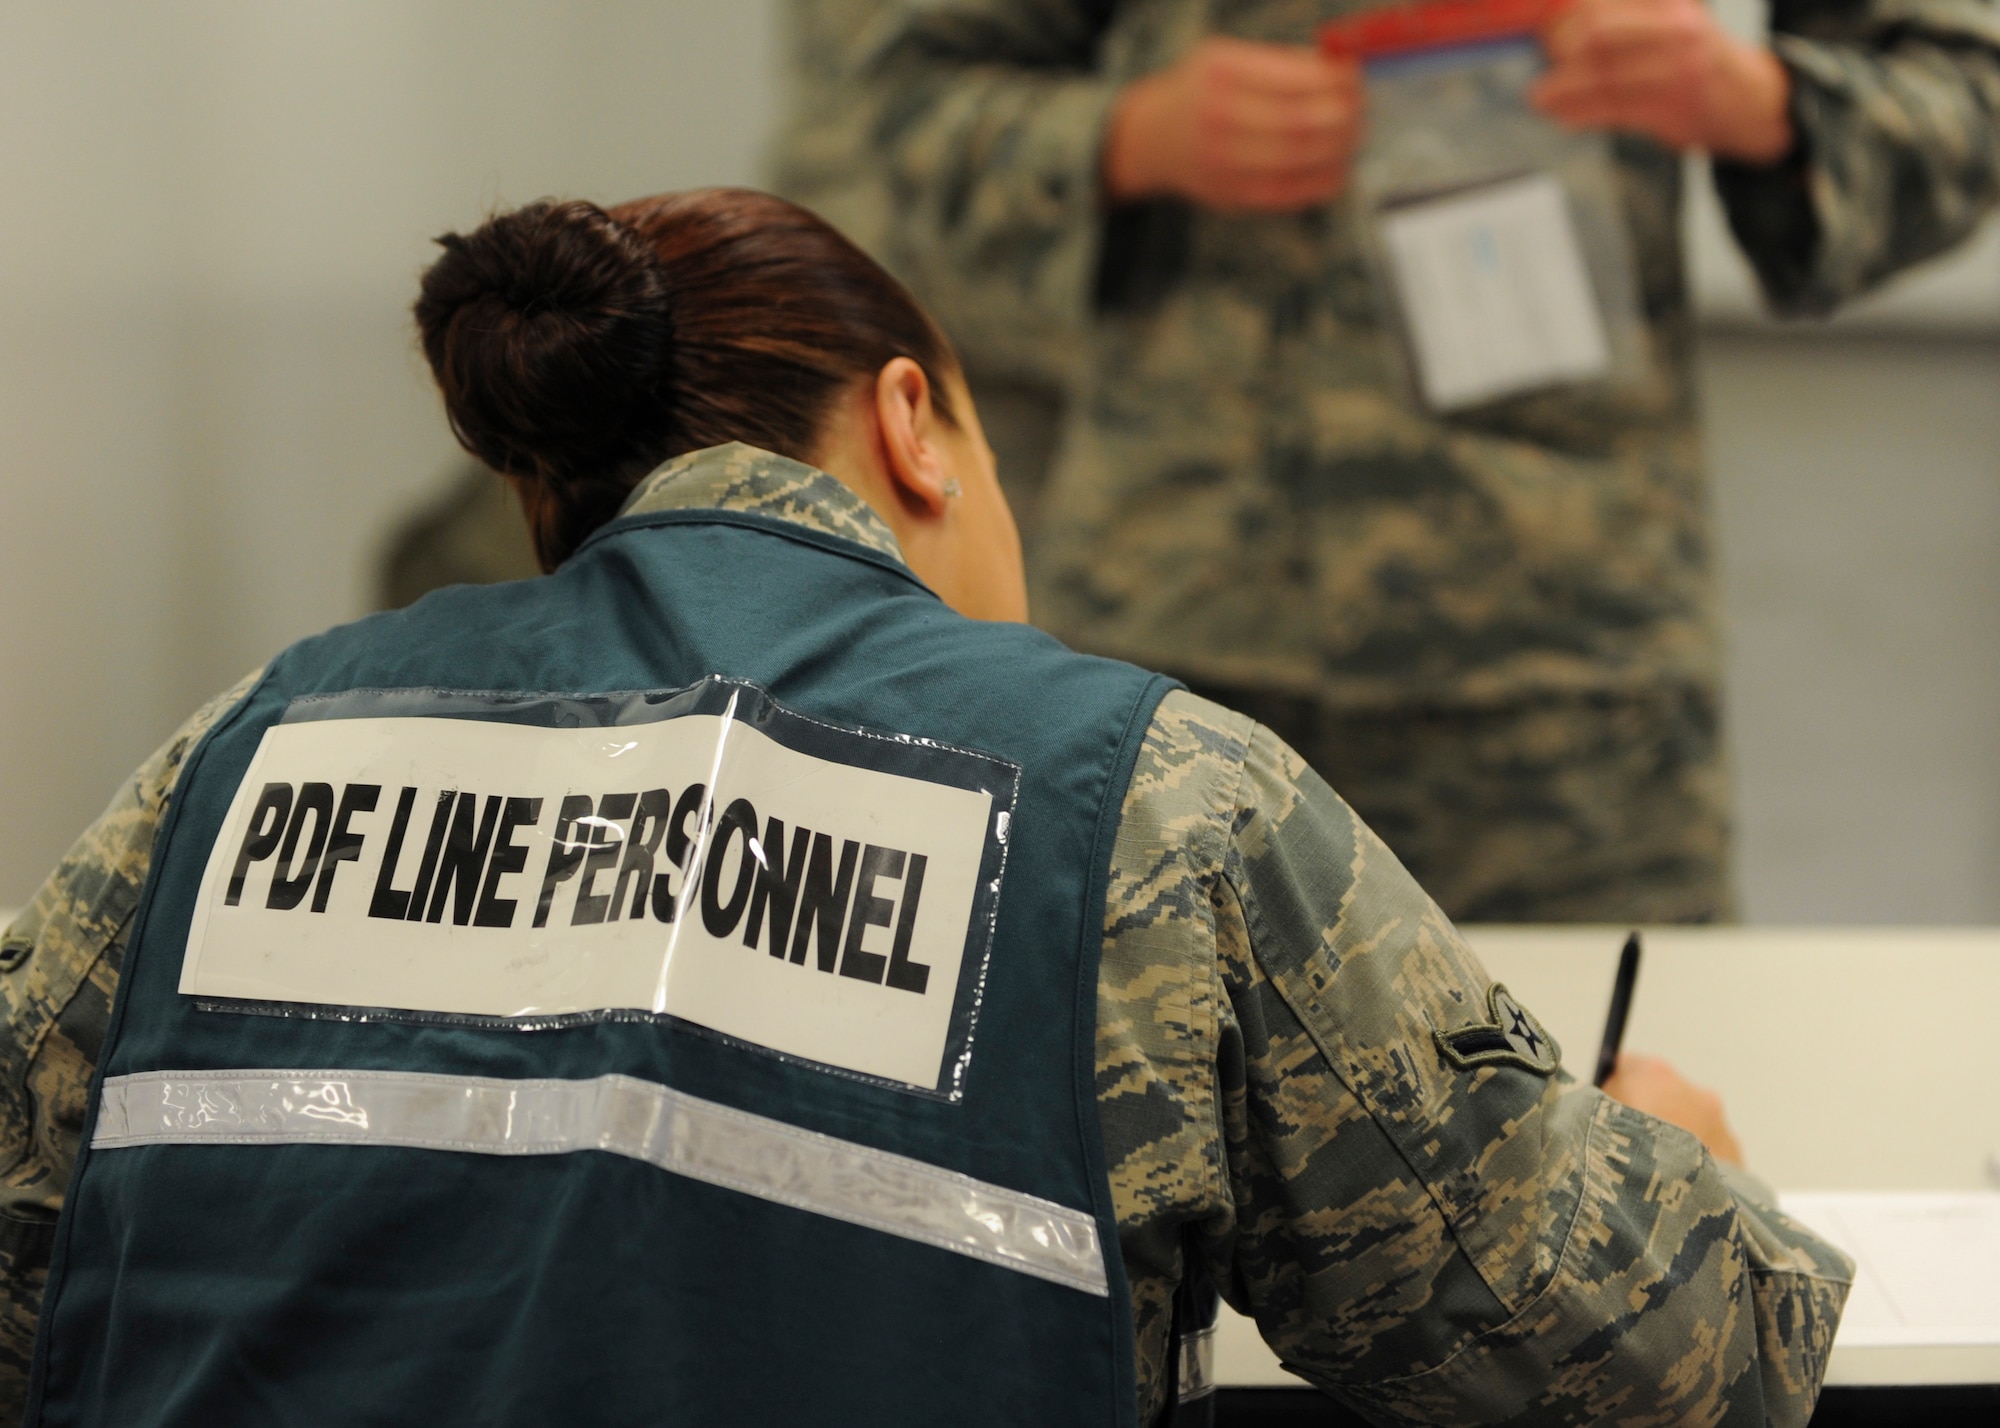 A member of the personnel deployment function (PDF) line checks the identification of a deployer during Exercise Global Thunder 17 (GT17) at Whiteman Air Force Base, Mo., Oct. 26, 2016. Exercises like GT17 involve extensive planning and coordination to provide unique training opportunities for assigned units and forces. (U.S. Air Force by Senior Airman Danielle Quilla)